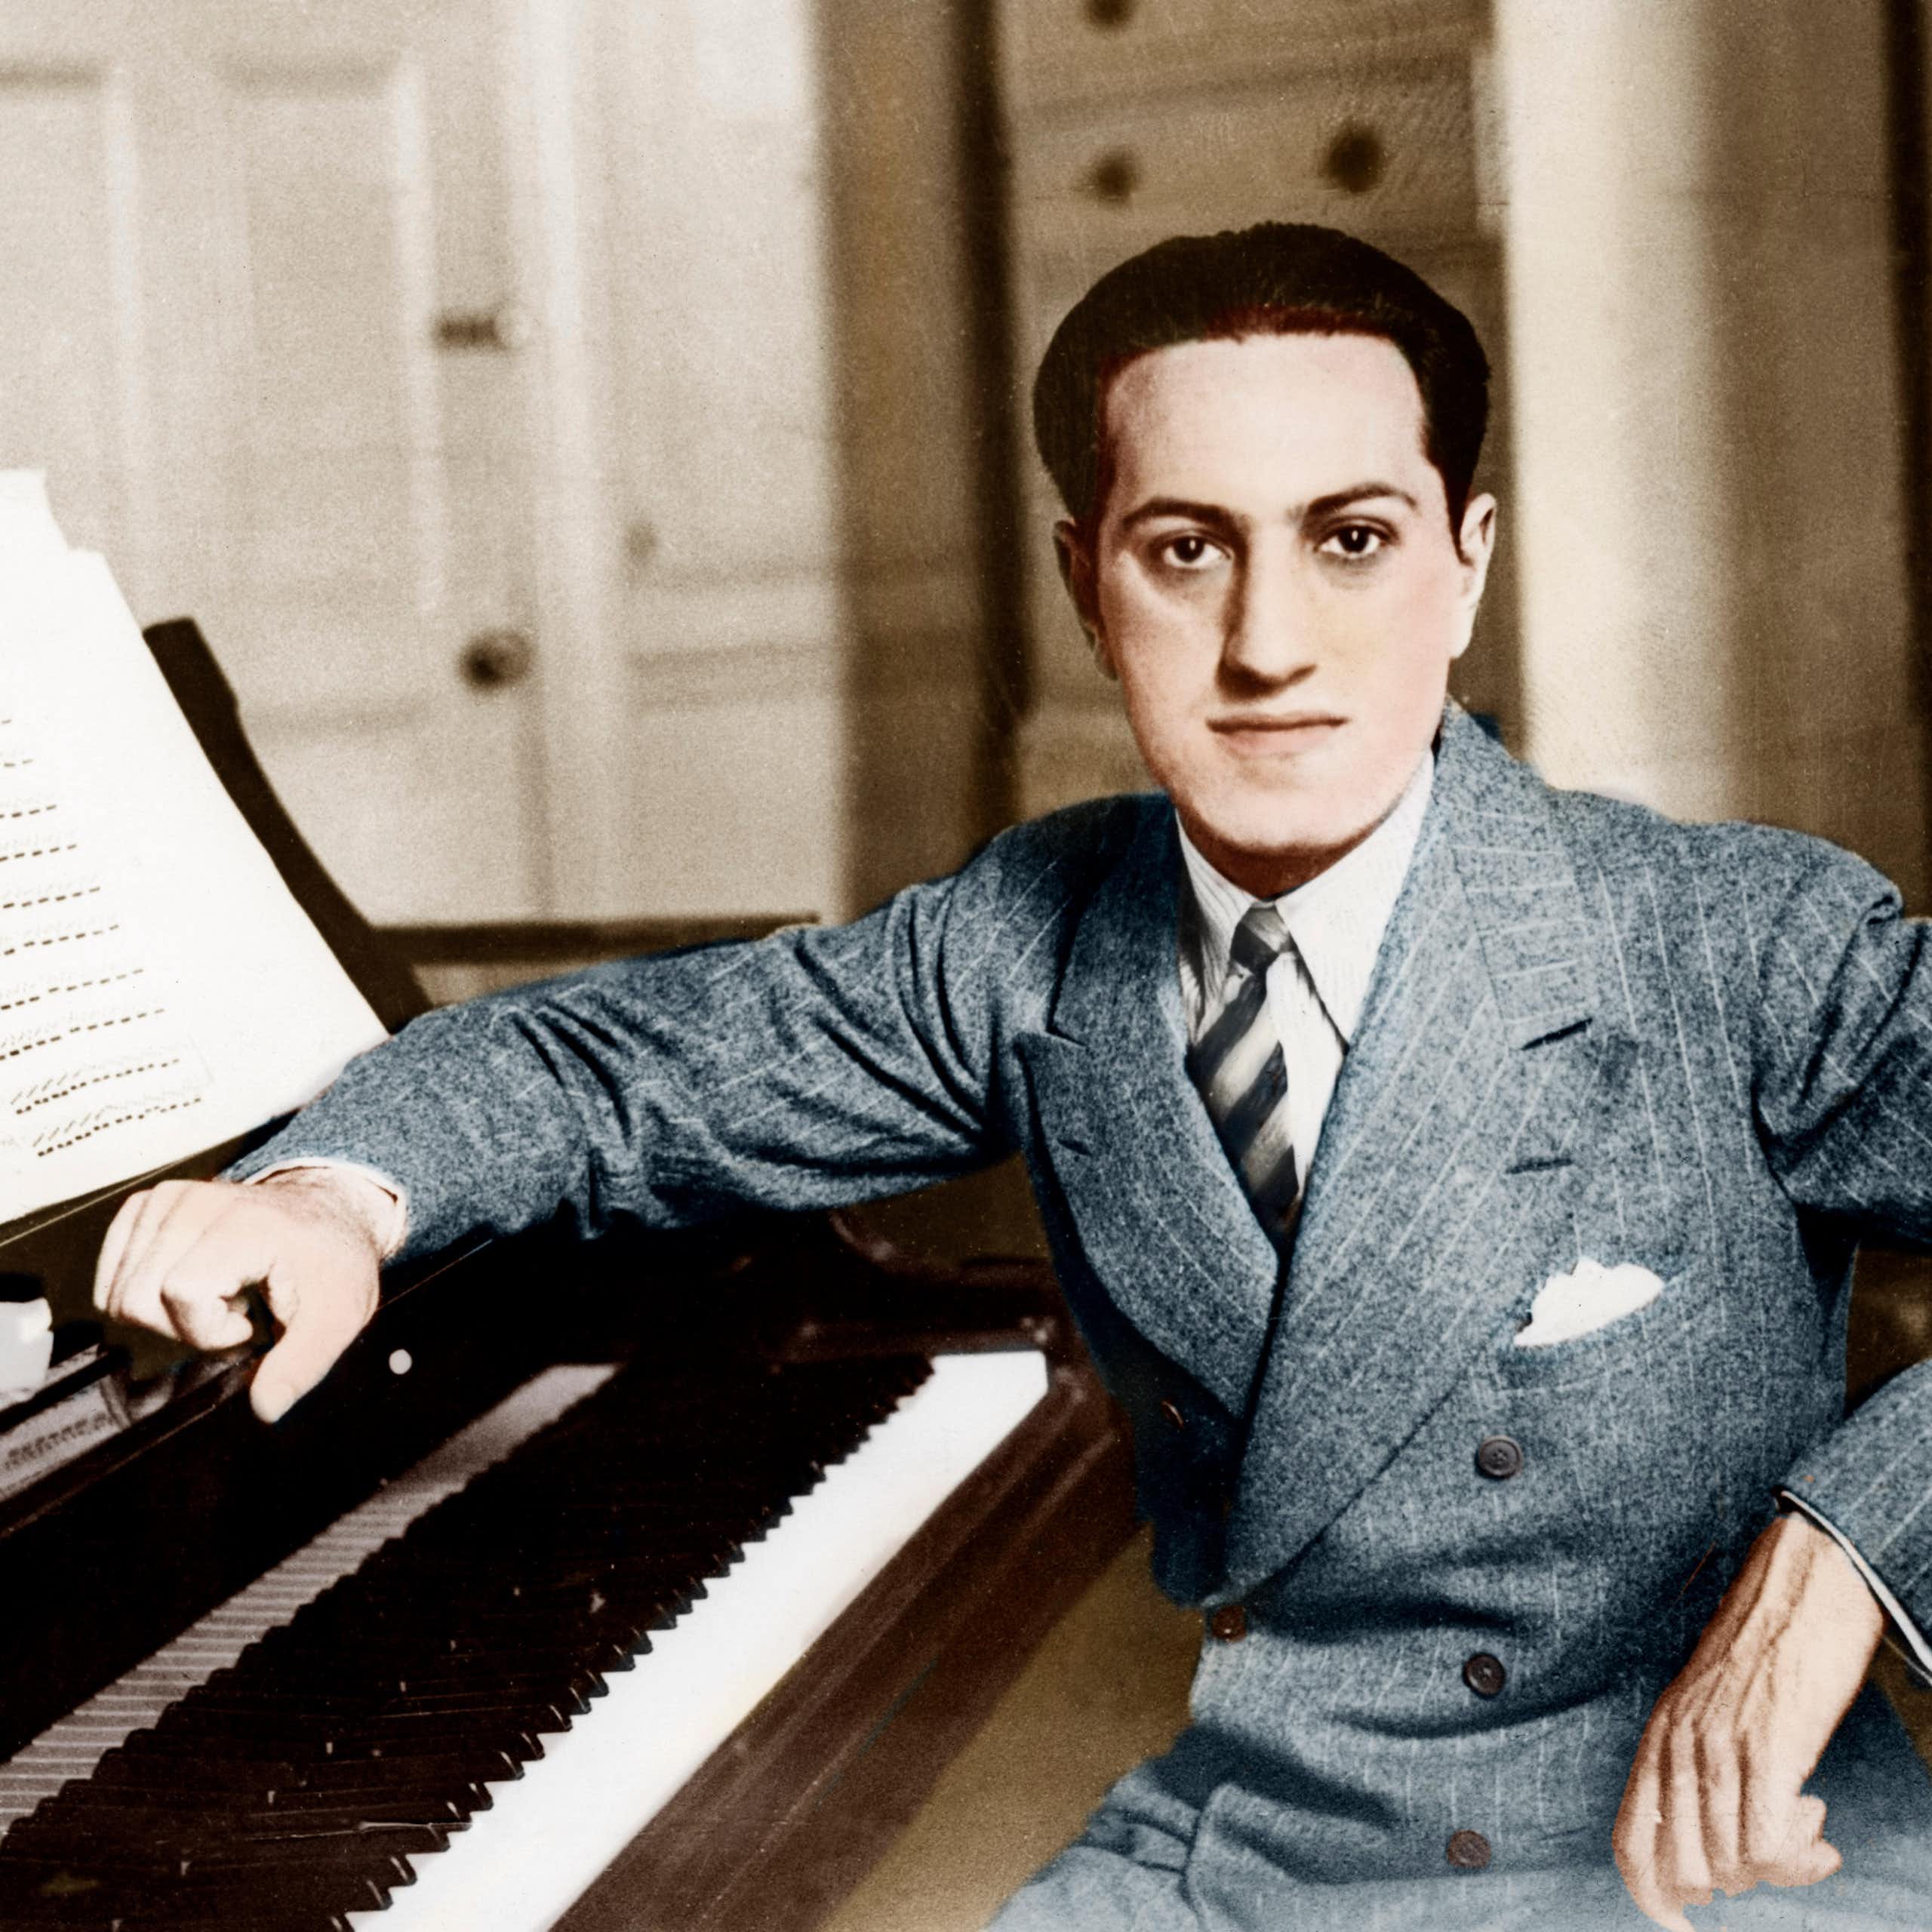 A young 1920s man (George Gershwin) sitting at a piano.